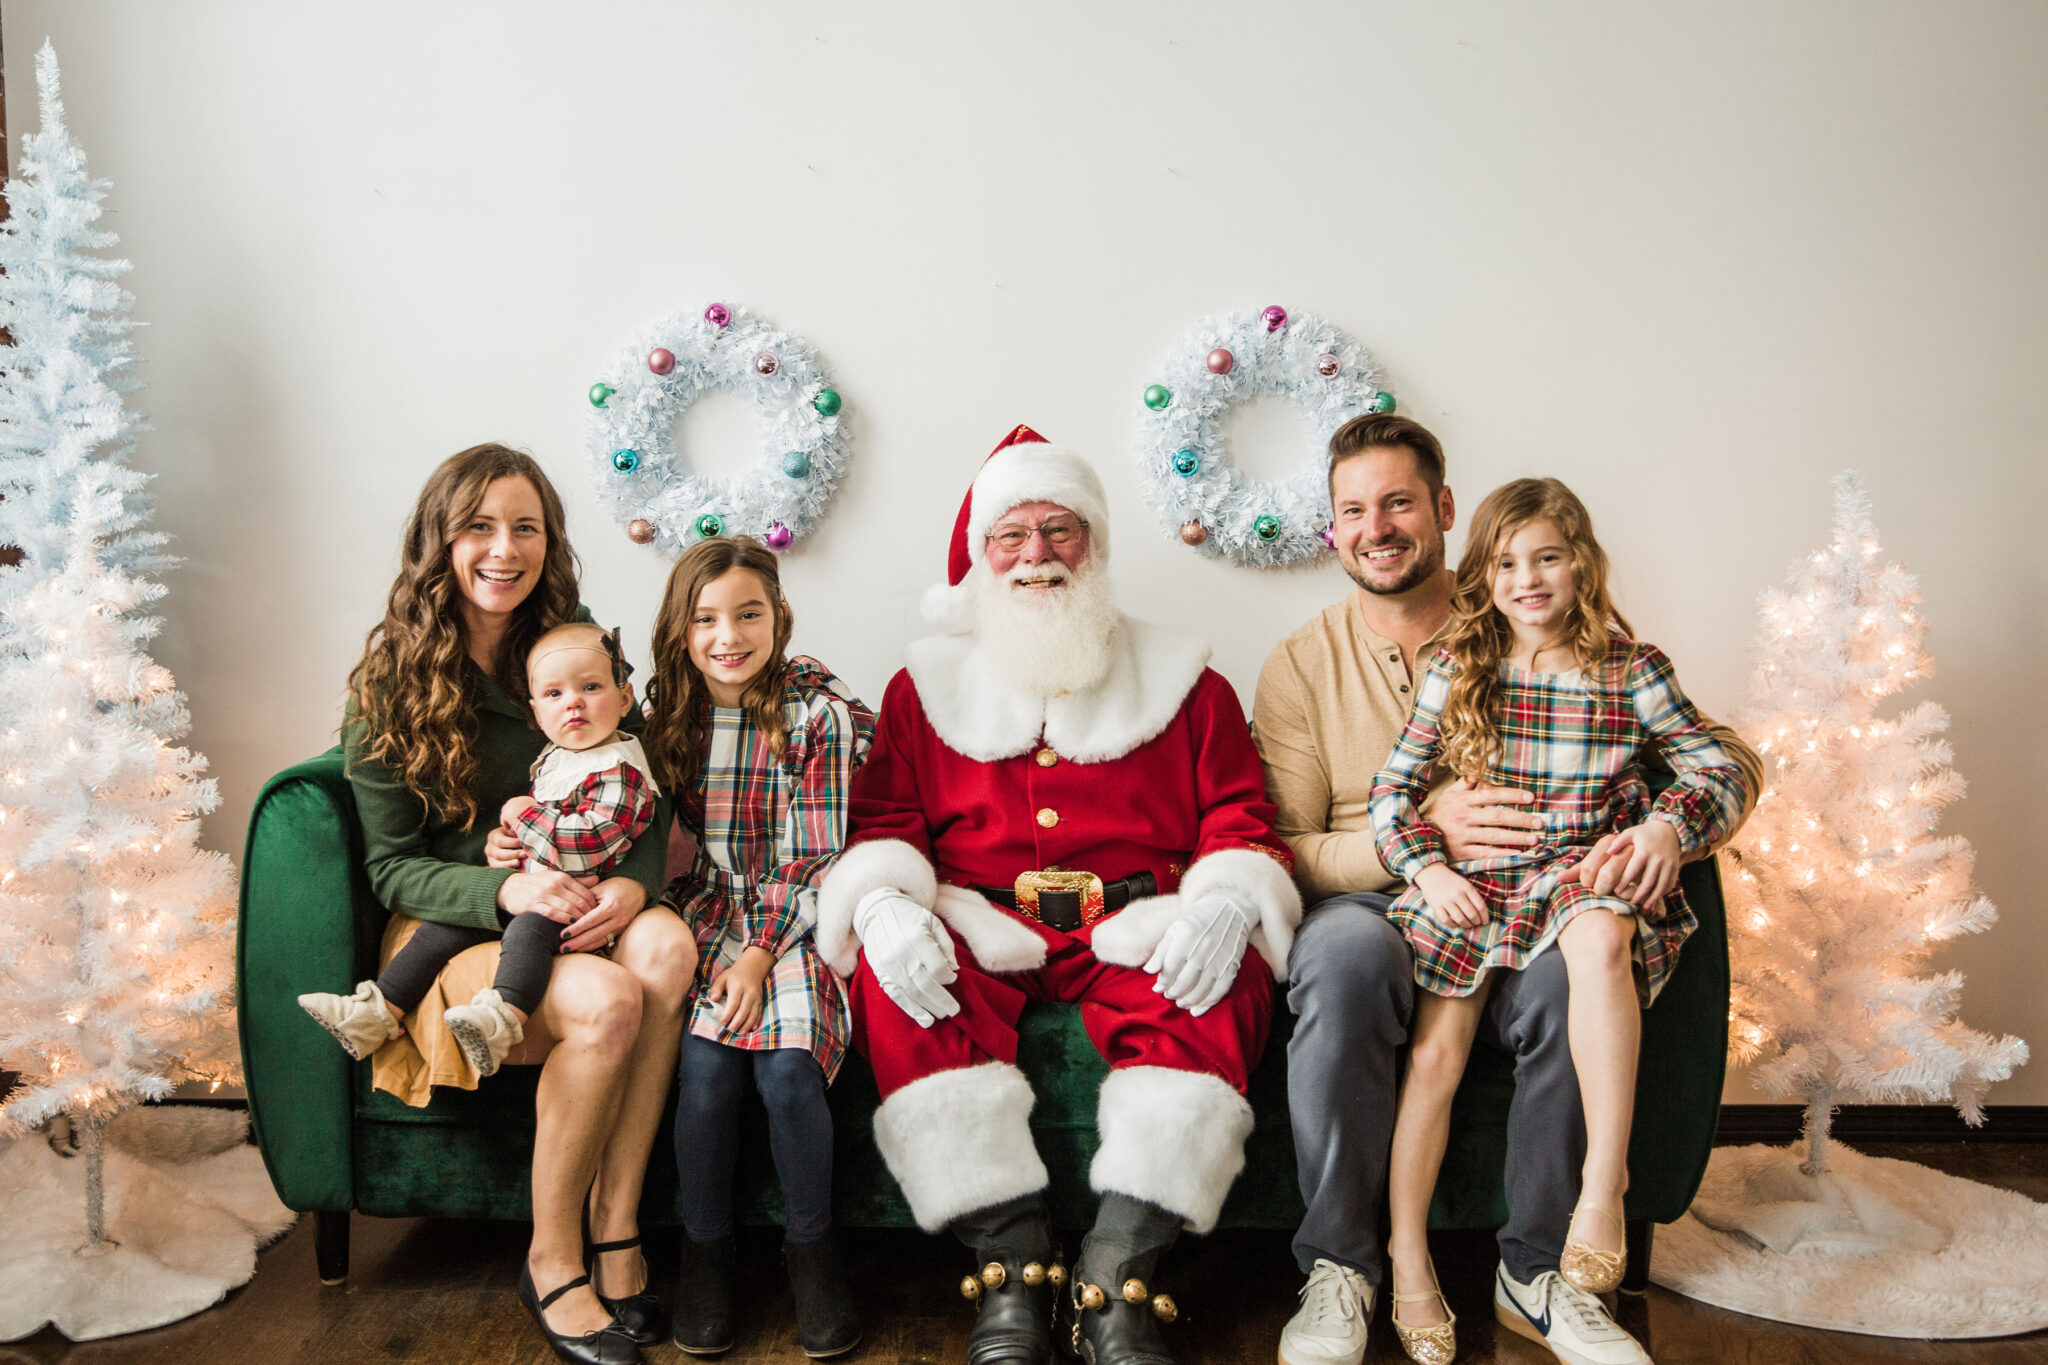 Holiday Family Photos with Santa - family of 5 sitting on green couch